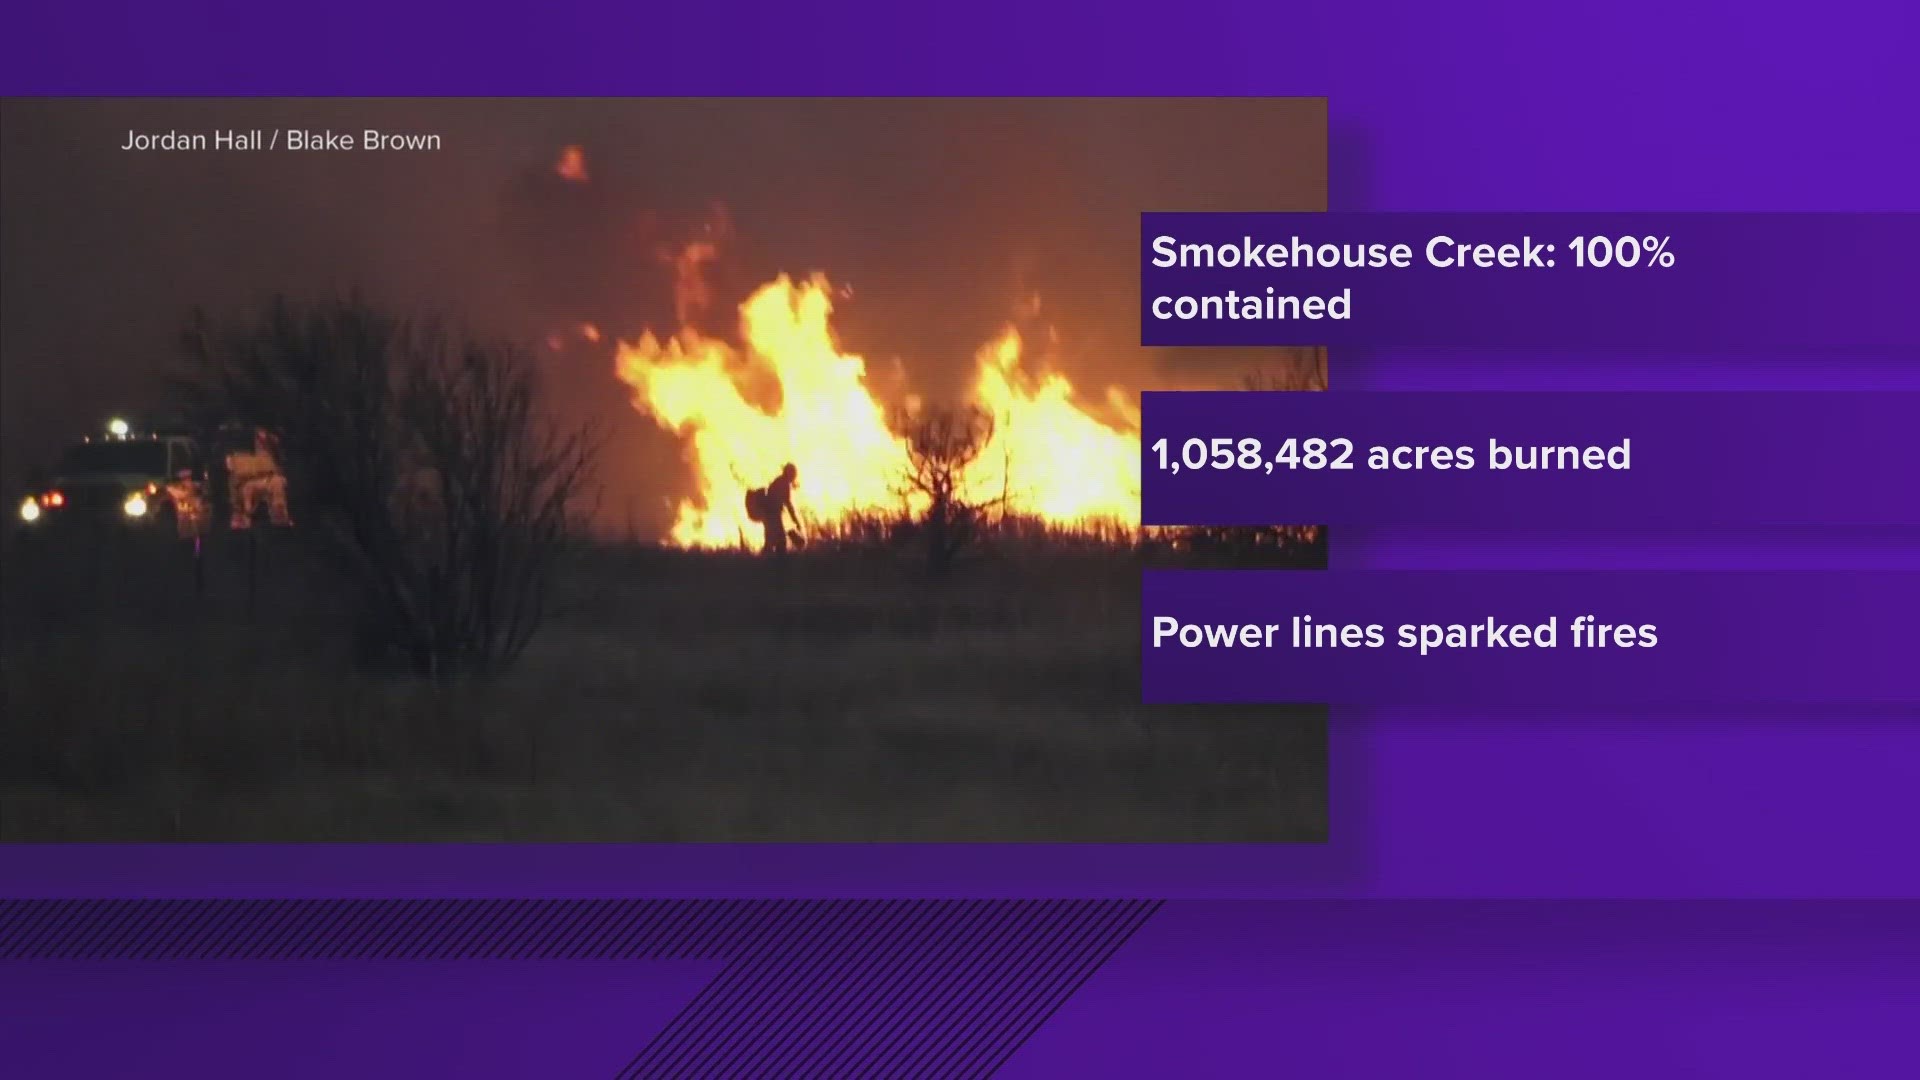 The fire is the largest recorded fire in the history of Texas.